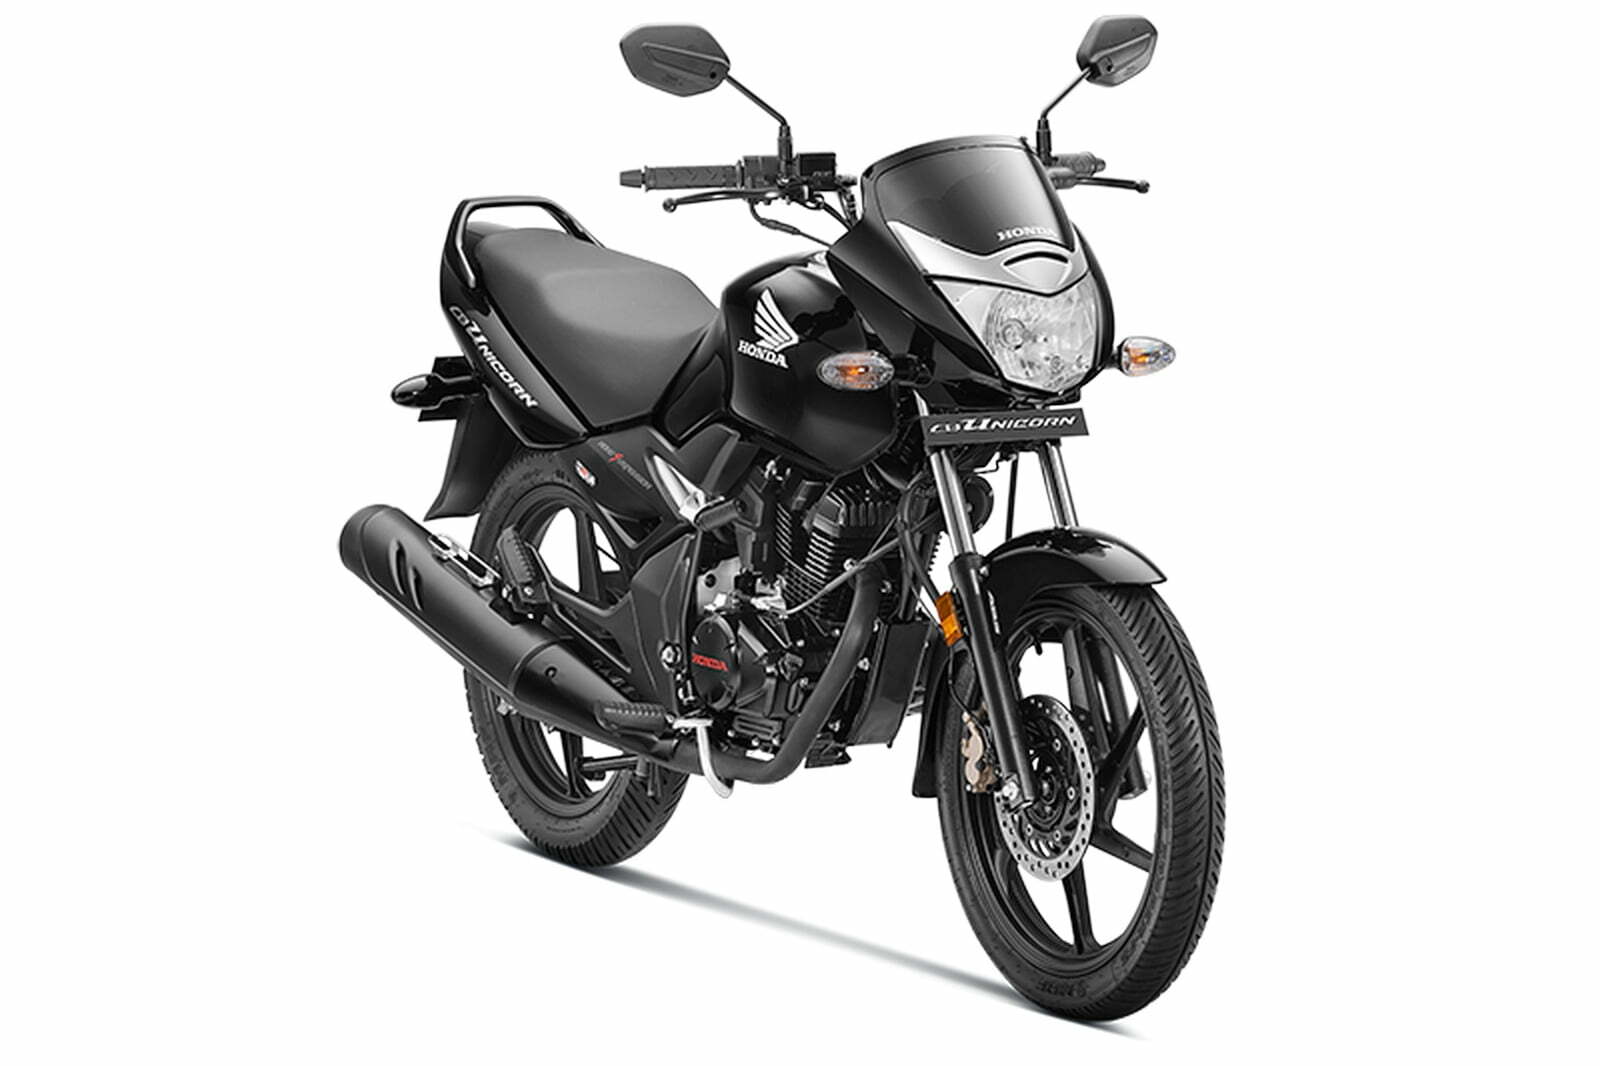 2019 Honda Unicorn 150 Abs Launched Know Price And Details - honda unicorn 150 new model 2019 price